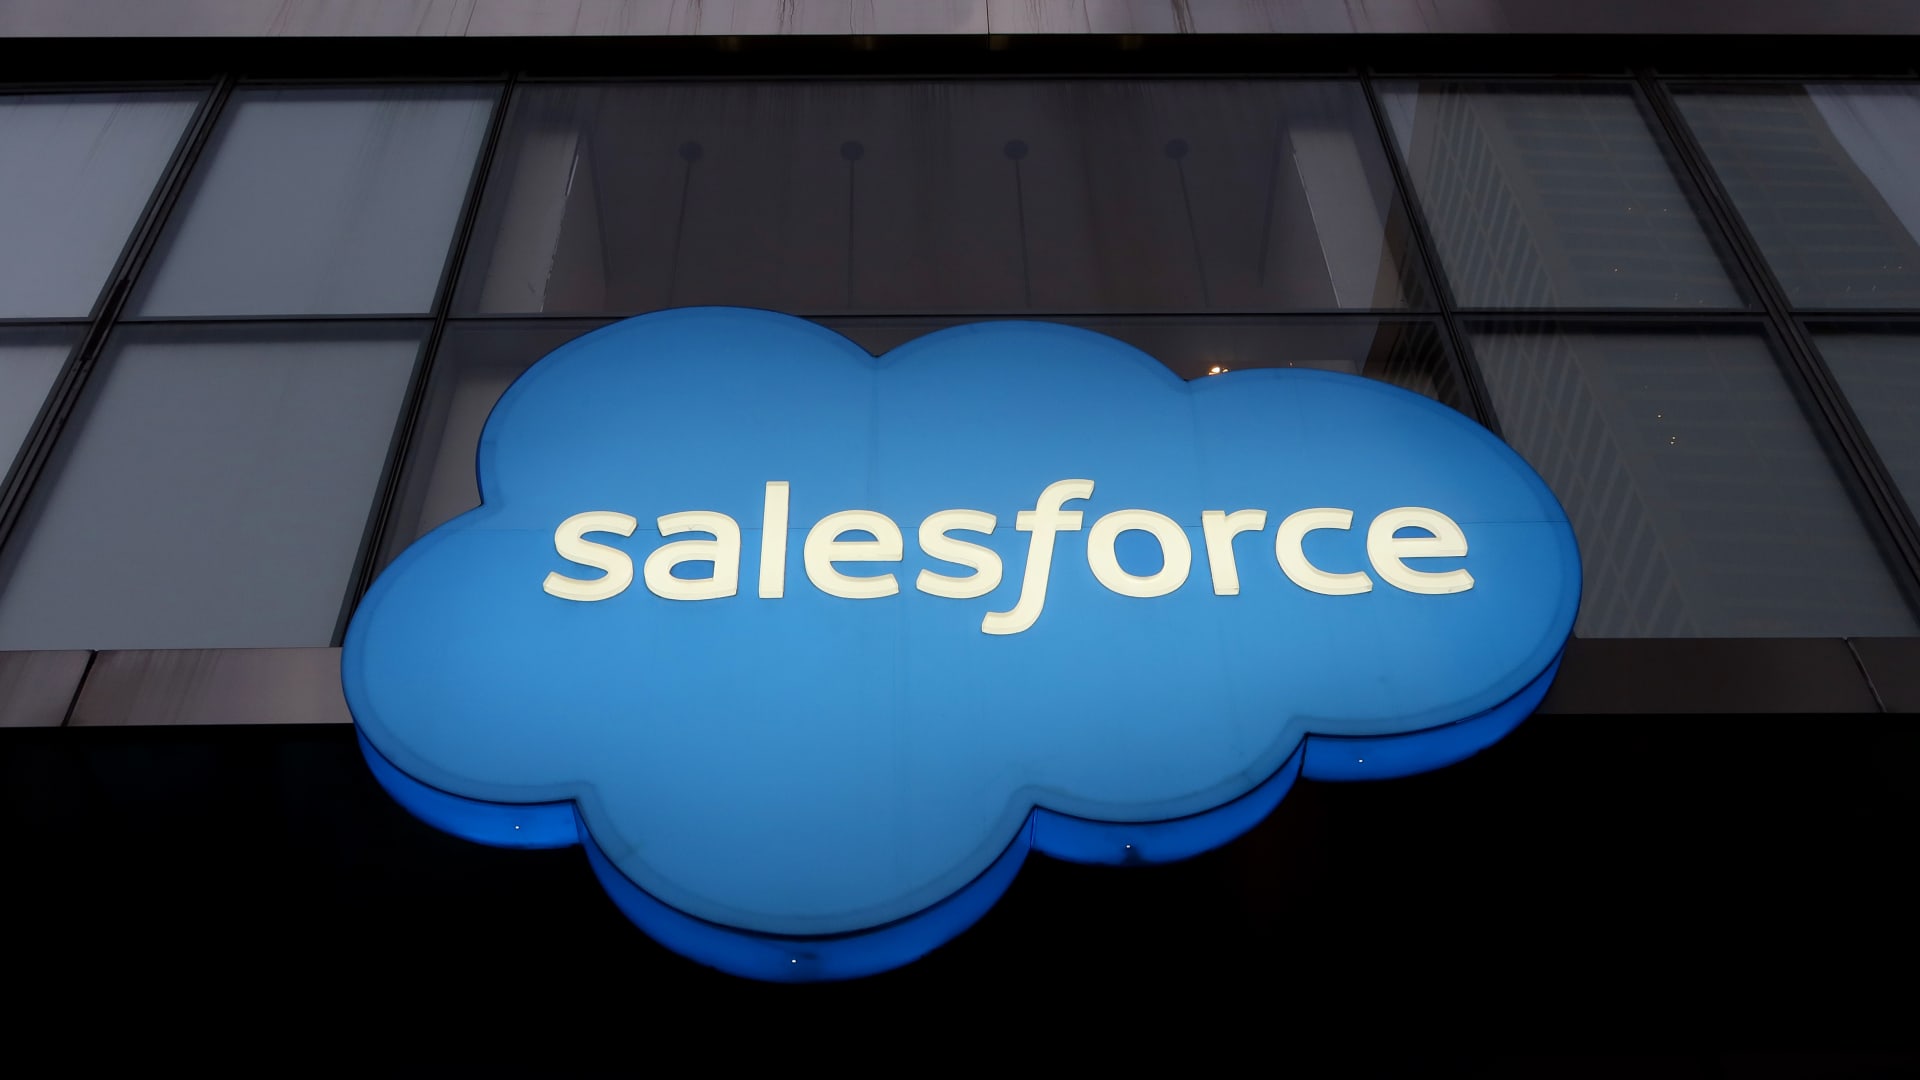 Salesforce to open new AI center in London in UK investment drive